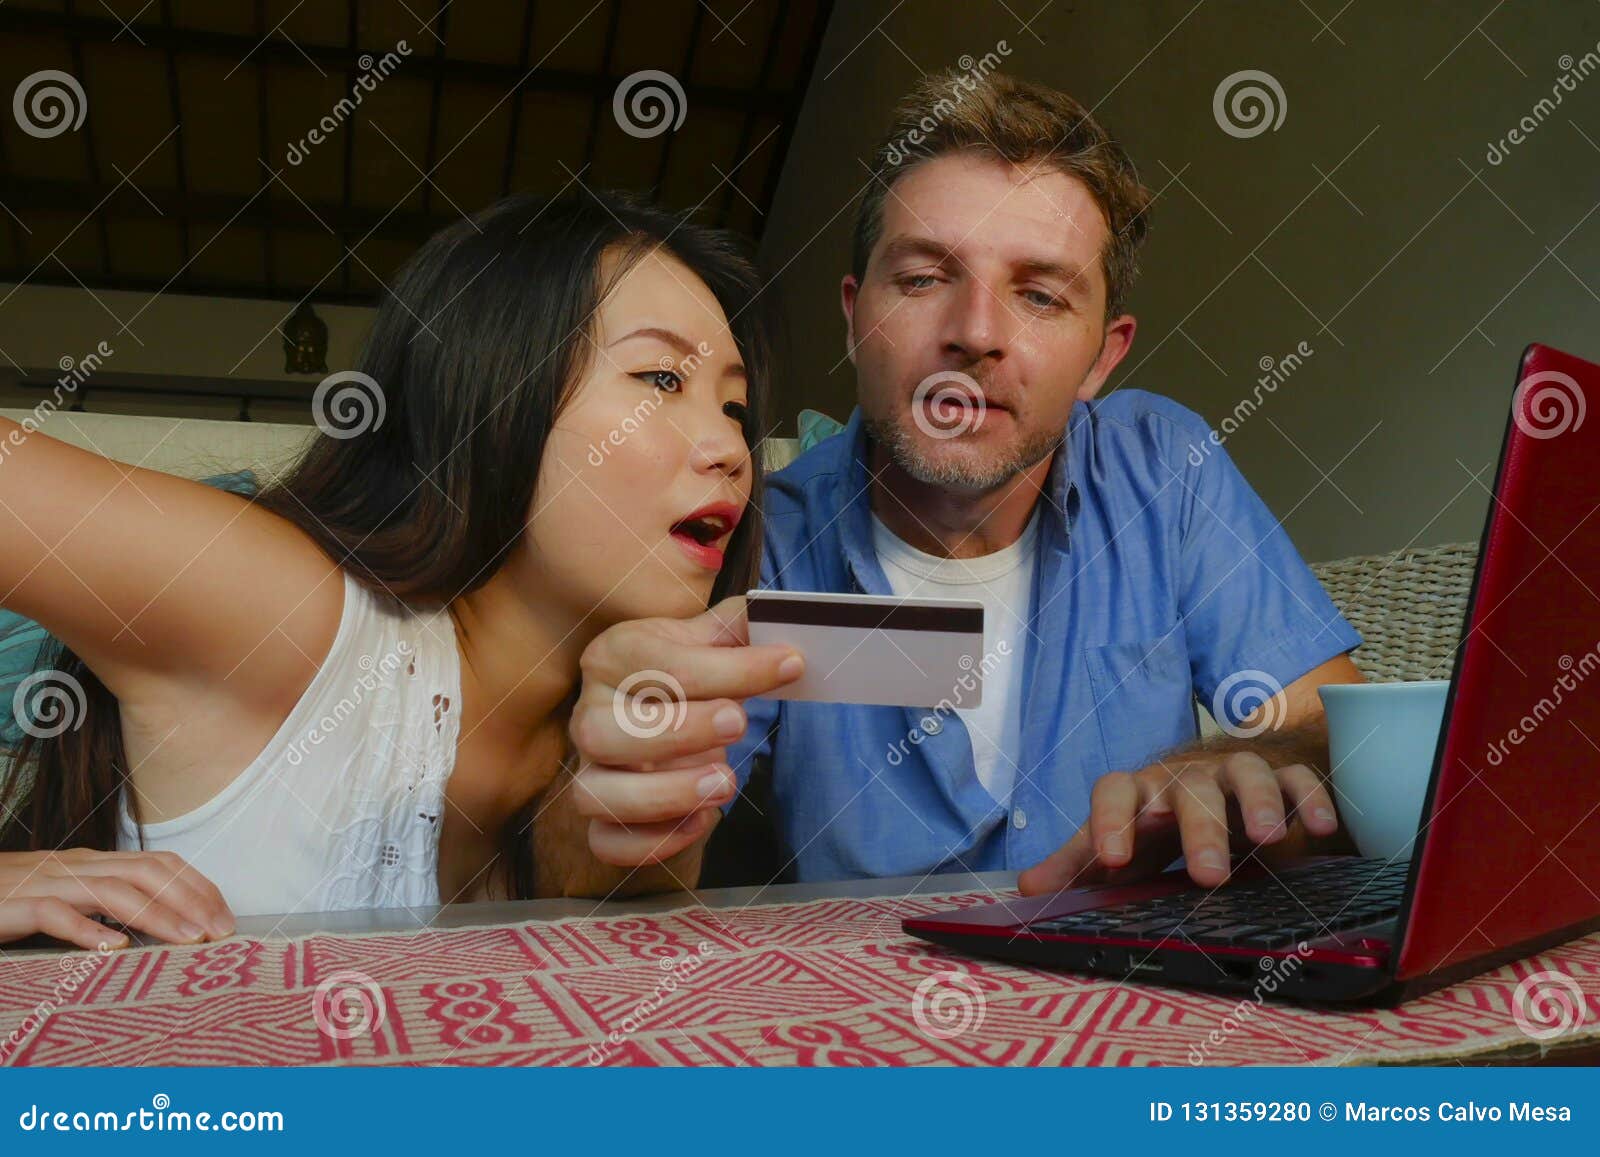 young-happy-excited-mixed-ethnicity-couple-asian-chinese-woman-white-man-internet-banking-online-shopping-cr-credit-card-131359280.jpg